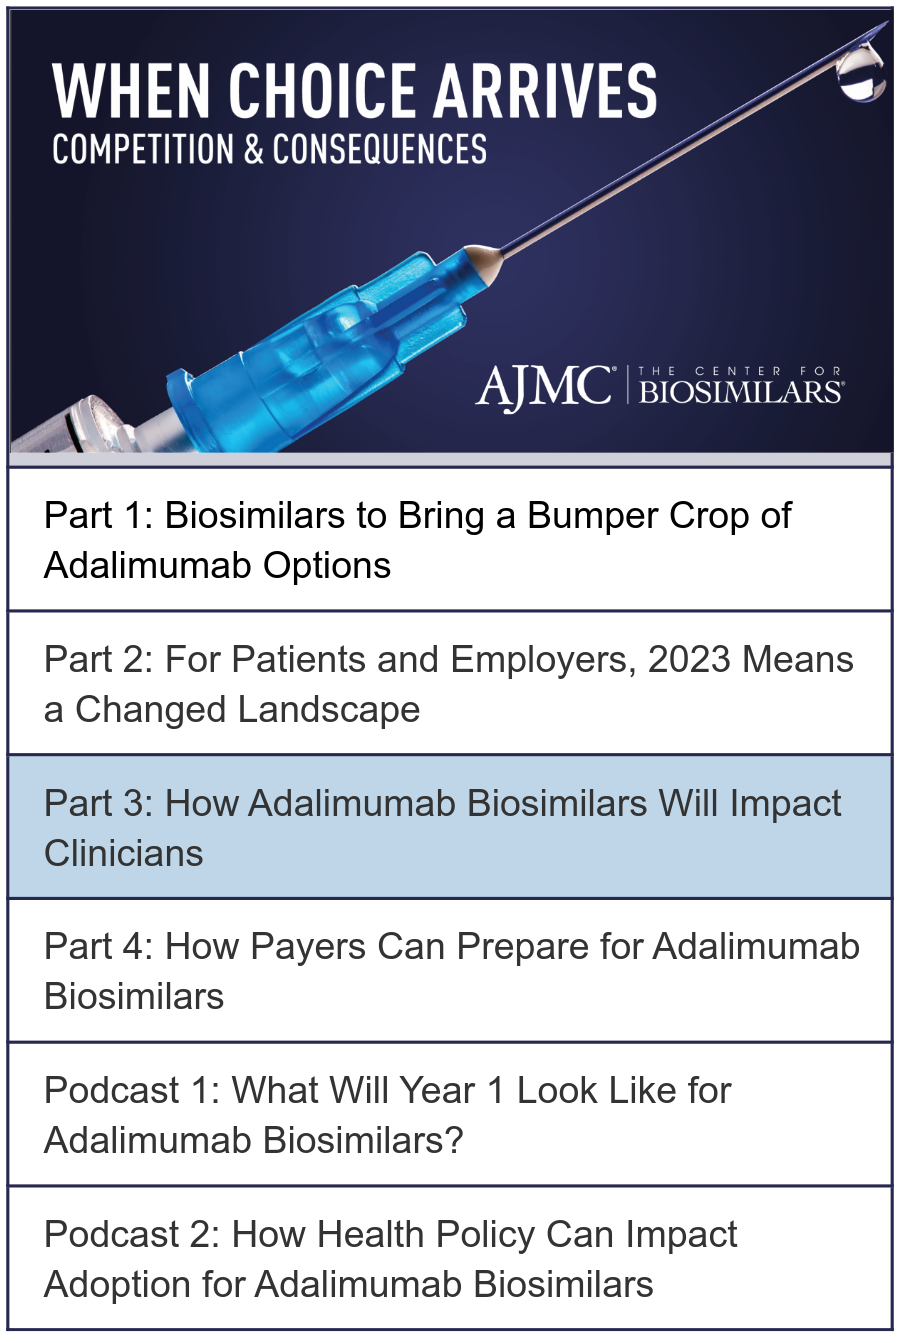 "When Choice Arrives: Competition & Consequences" written over a bright blue syringe with the AJMC/The Center for Biosimilars logo in the bottom right corner. Under the image is a list of 6 items (4 article titles and 2 podcasts). The third article item is highlighted.